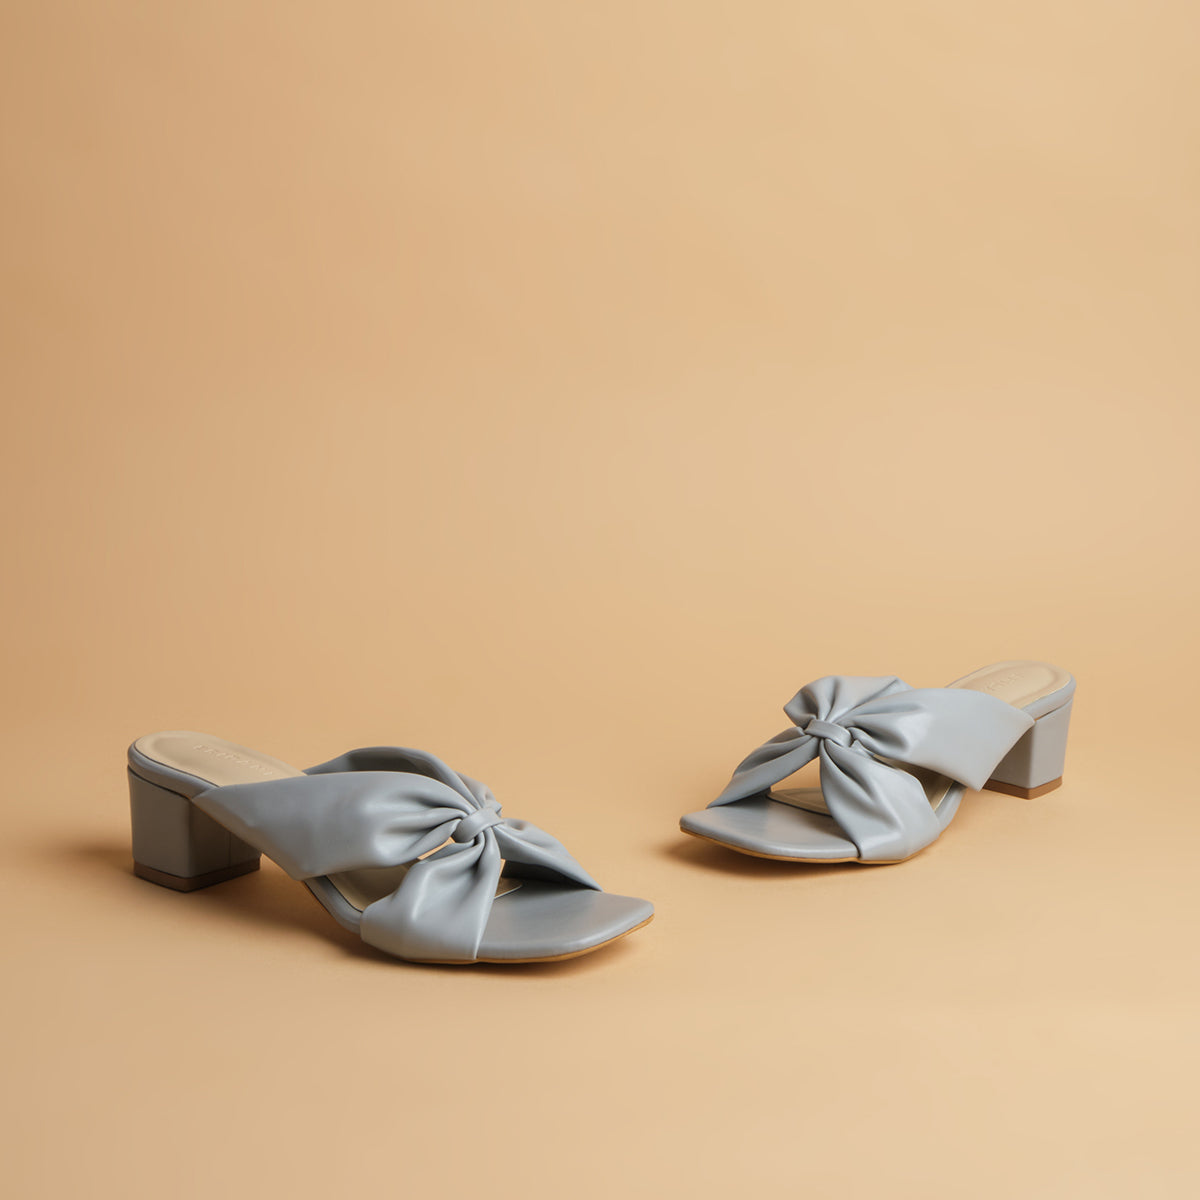 Ariel Knotted Heels